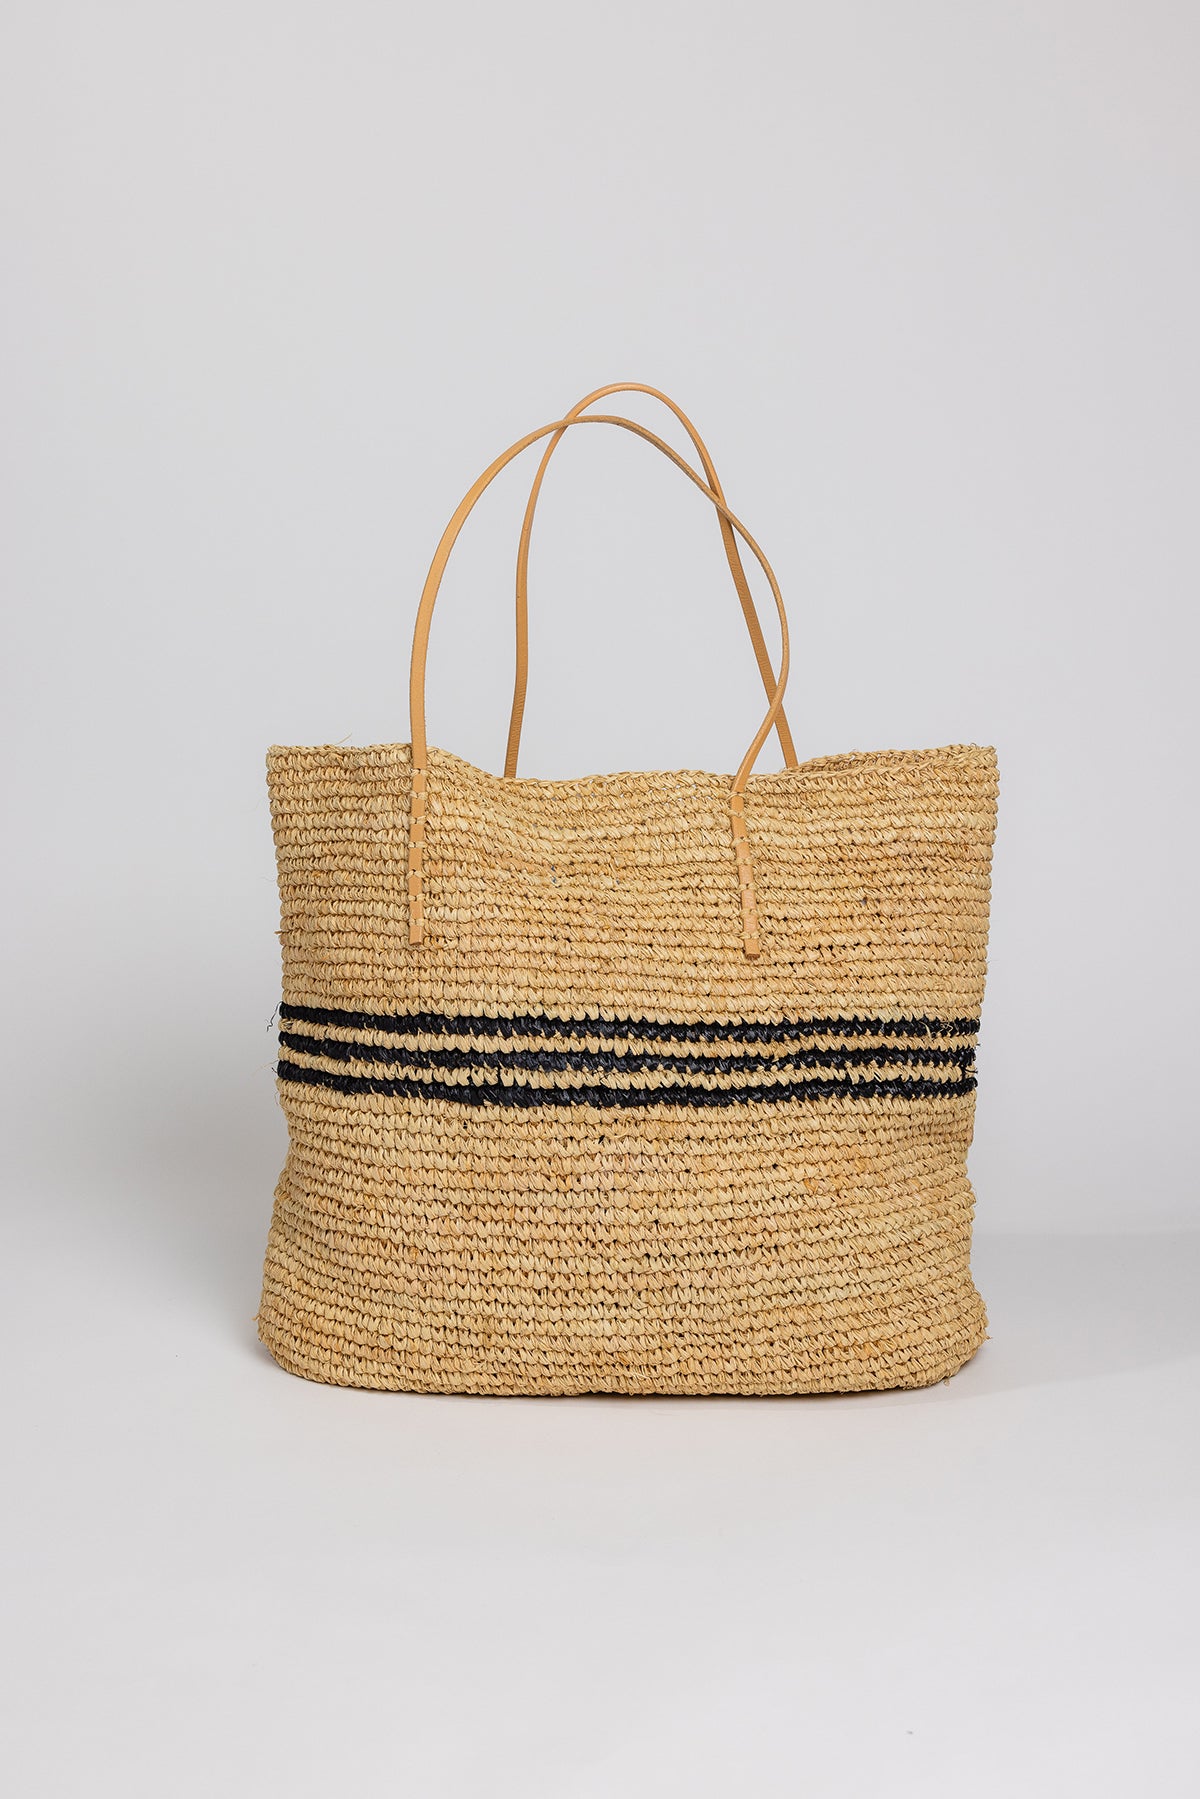   a LUXE STRIPE STRAW TOTE bag by Velvet by Graham & Spencer on a white background. 